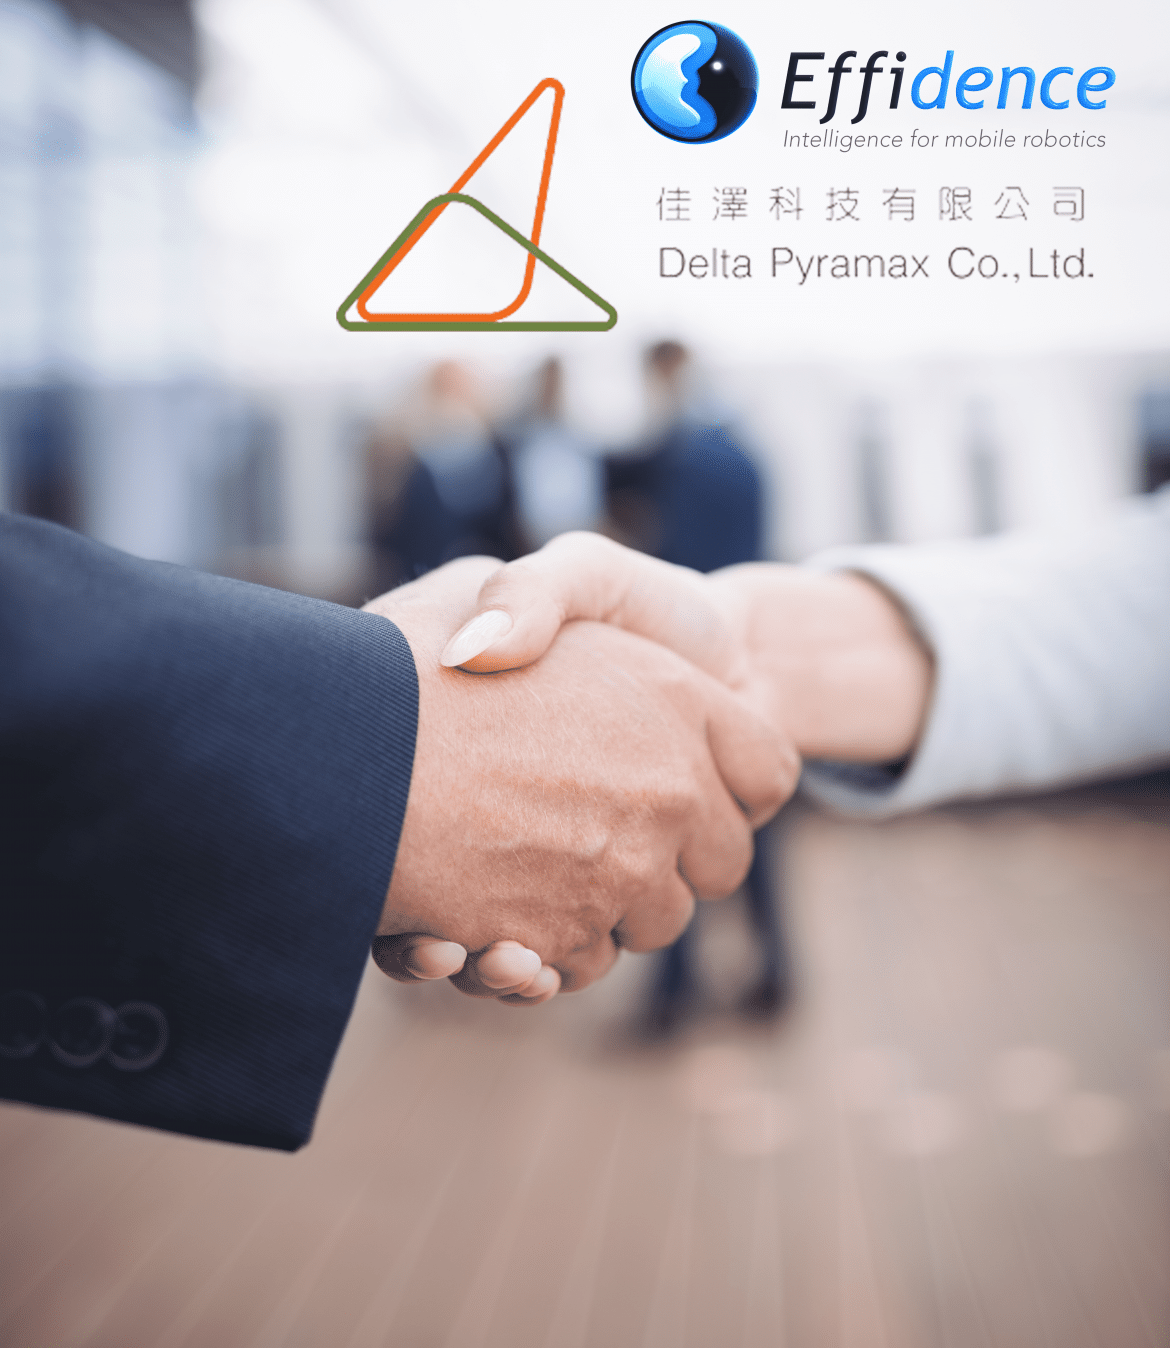 What better way to start the year than with a new partnership? Meet Effidence's new partner, Delta Pyramax, based in Hong Kong.